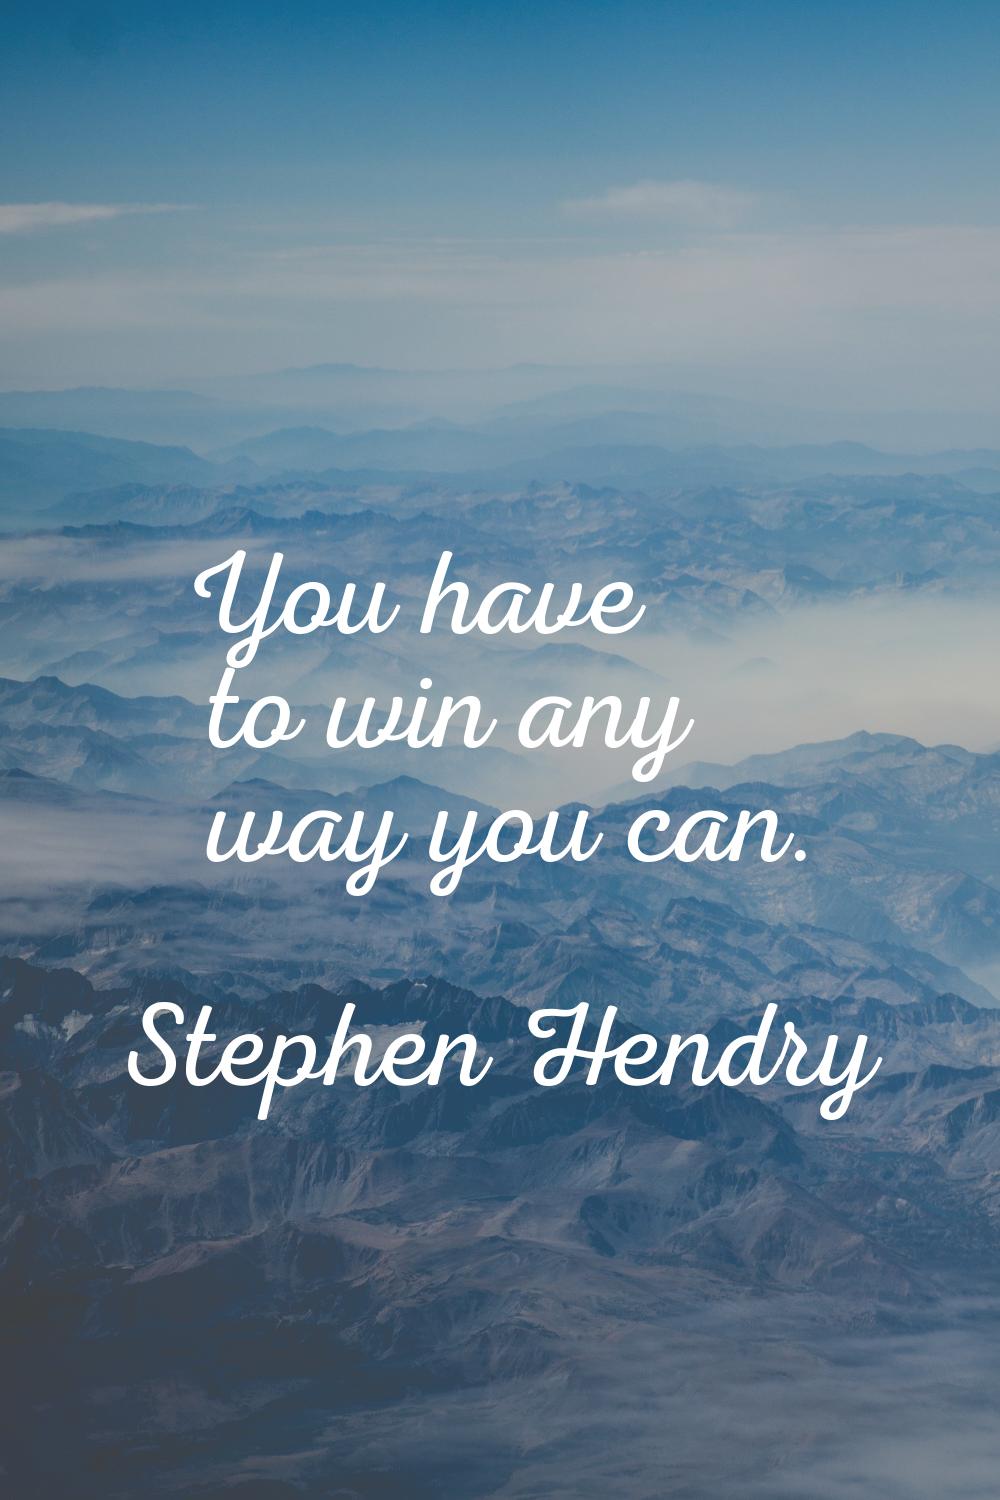 You have to win any way you can.